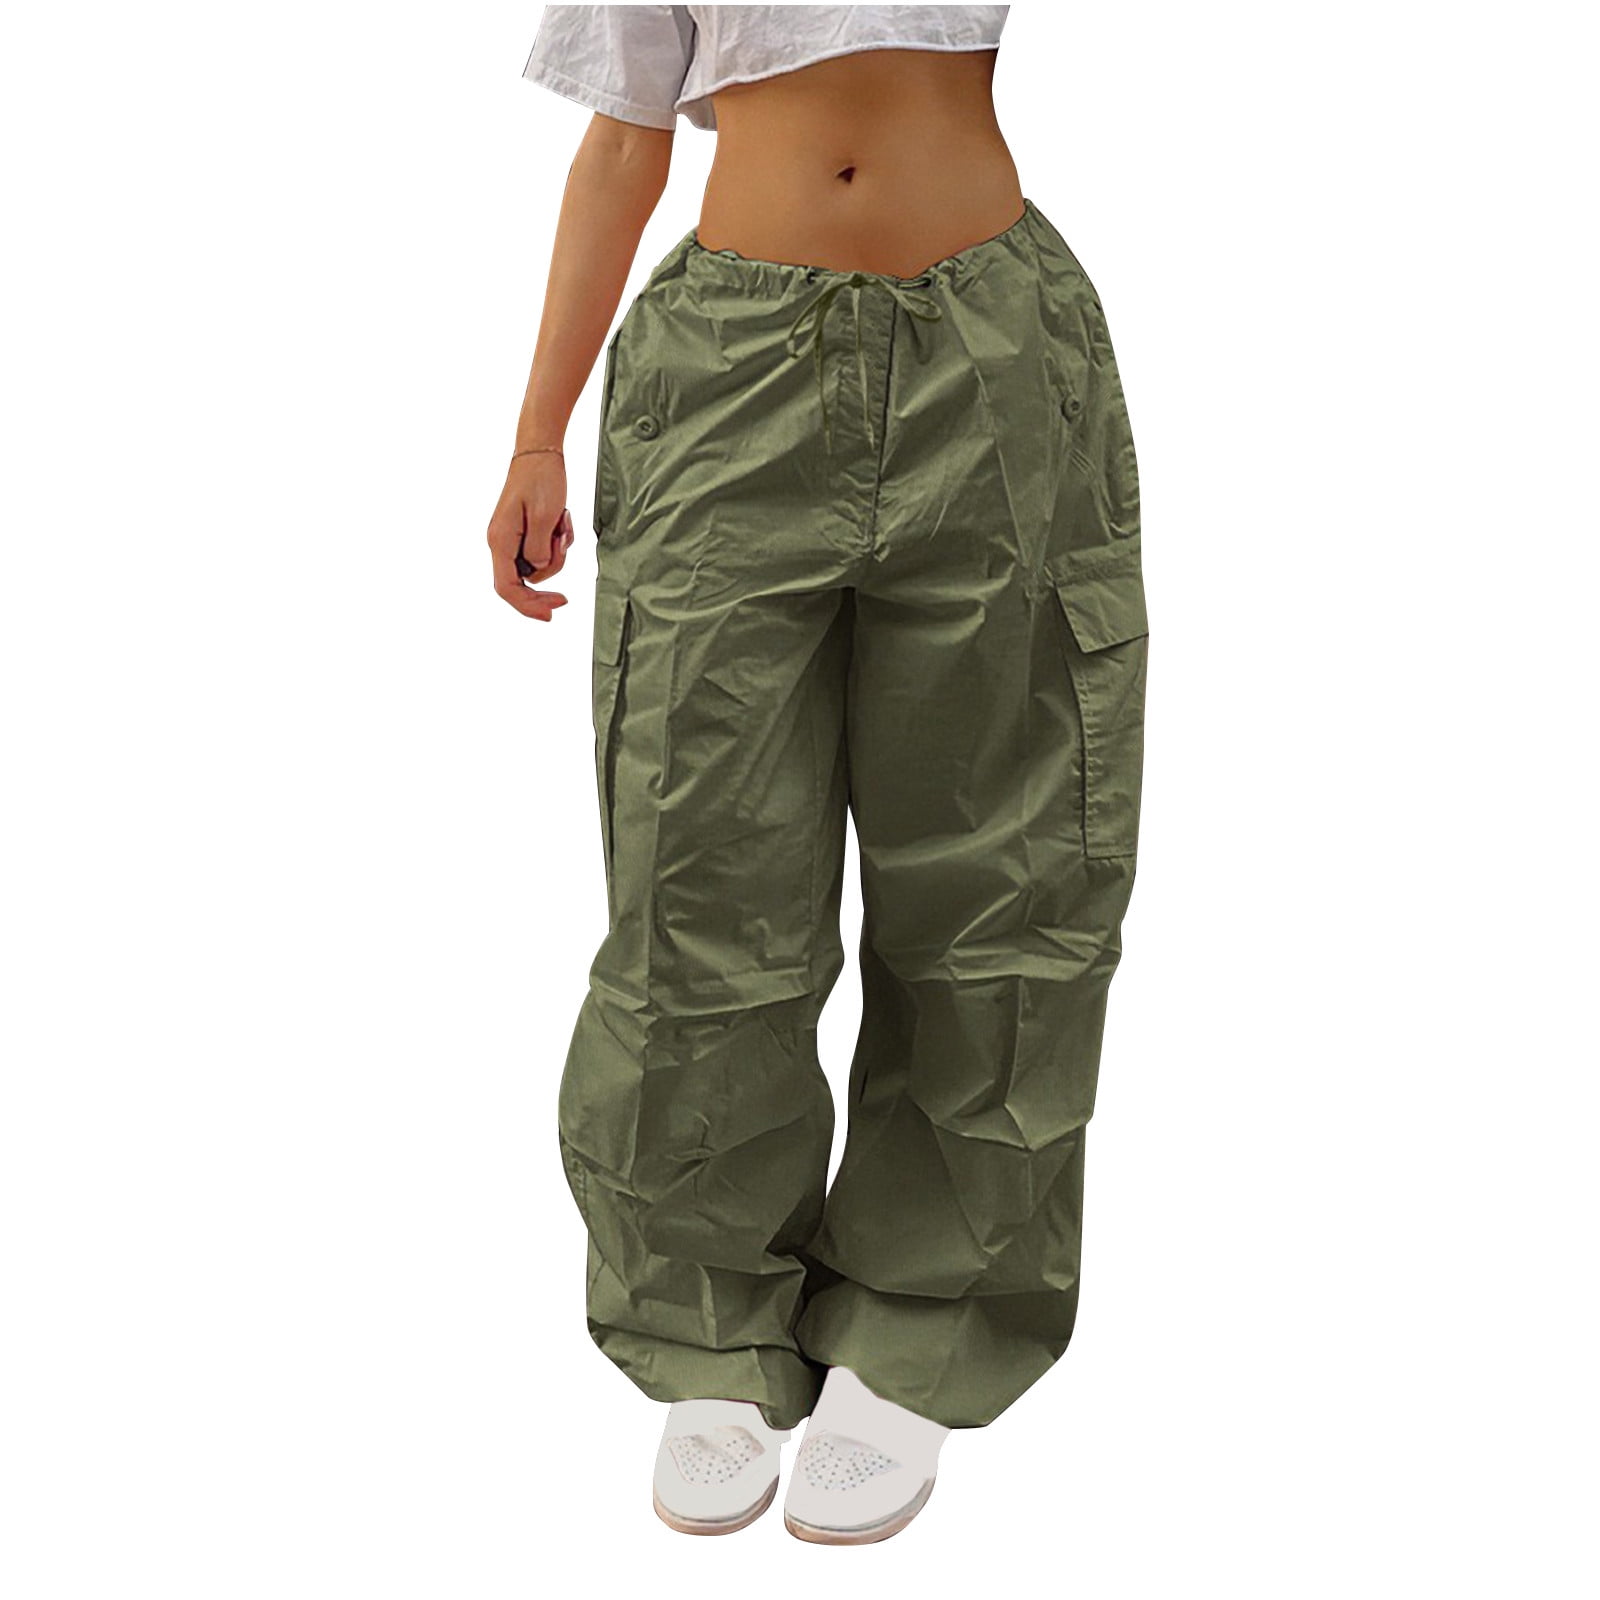 SMihono Clearance Teen Girls Full Length Trousers Cargo Pants Women's  Street Style Fitting Fashion Loose Casual Low Waisted Large Size Slimming  Leggings Overalls Long Pants Army Green 2 